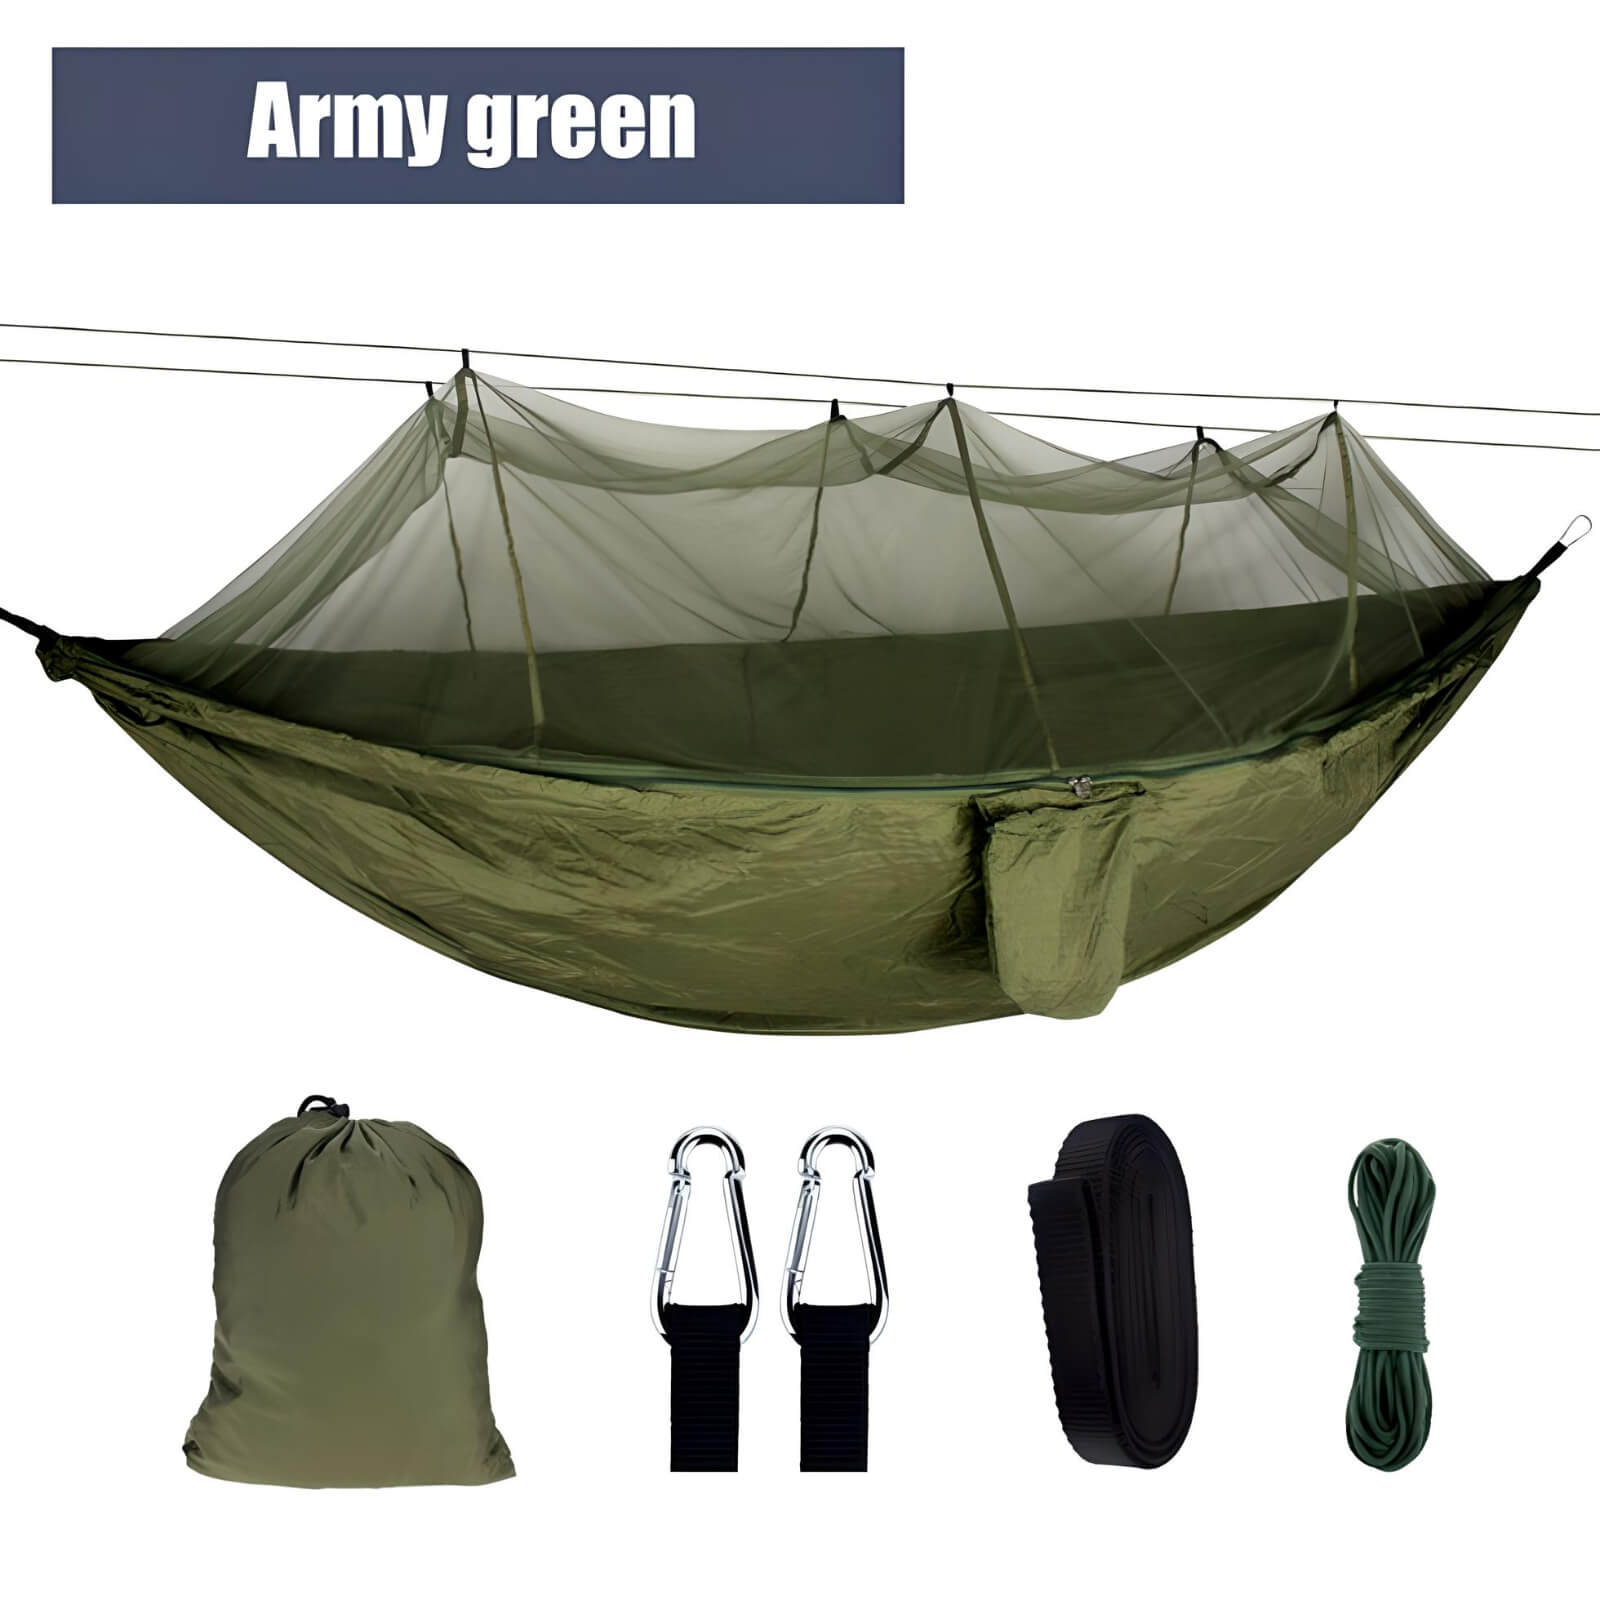 army-green-color-of-camping-hammock-with-mosquit-on-et